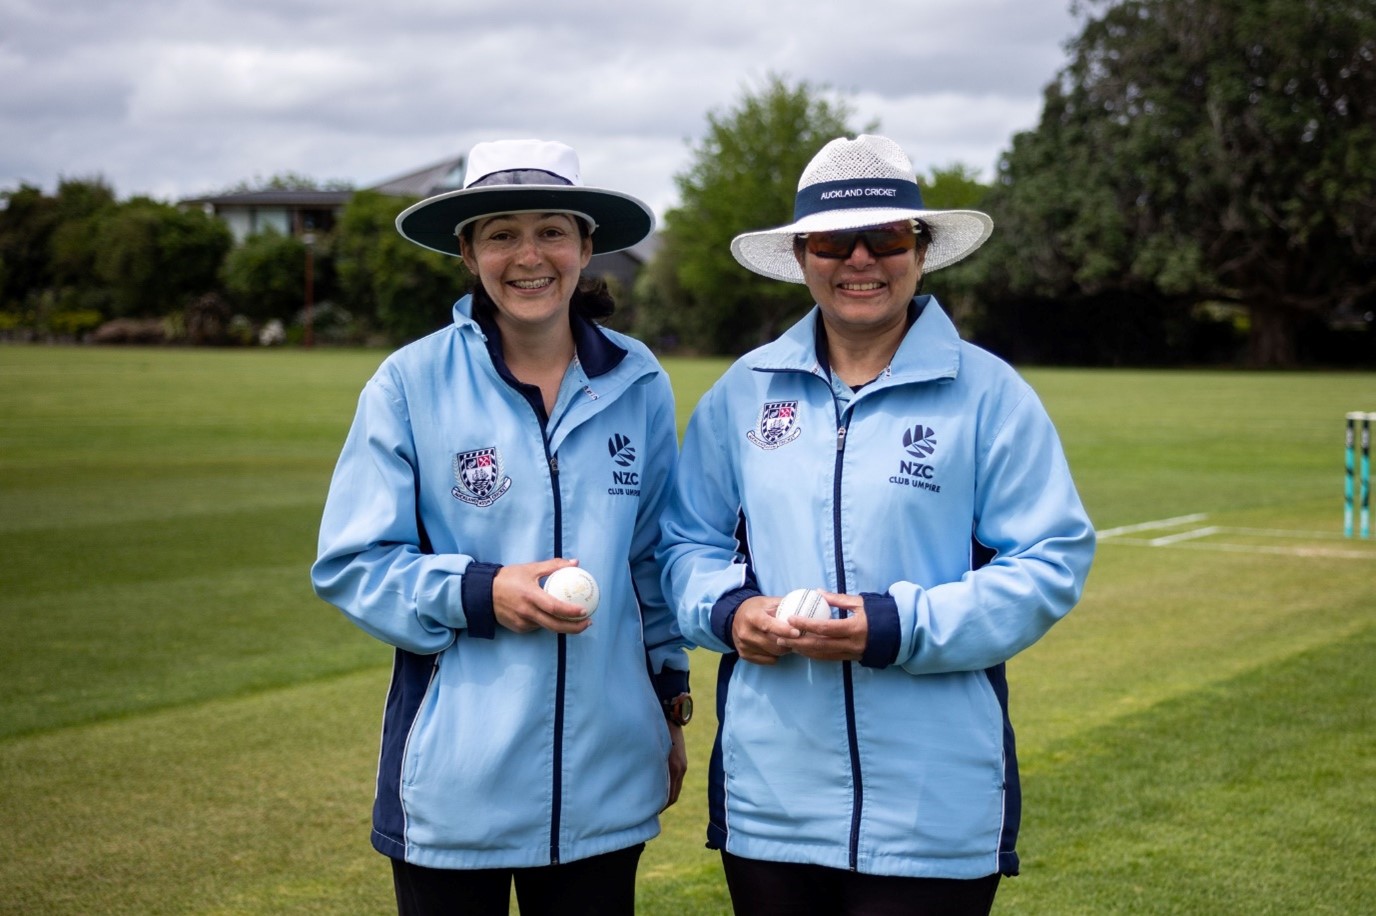 2023-24 Aspiring Female Umpire Programme Participants, Moth Sutherland-Tupp and Marise-Ann Fernandes, the on-field umpires for the Legends Cup match in Auckland